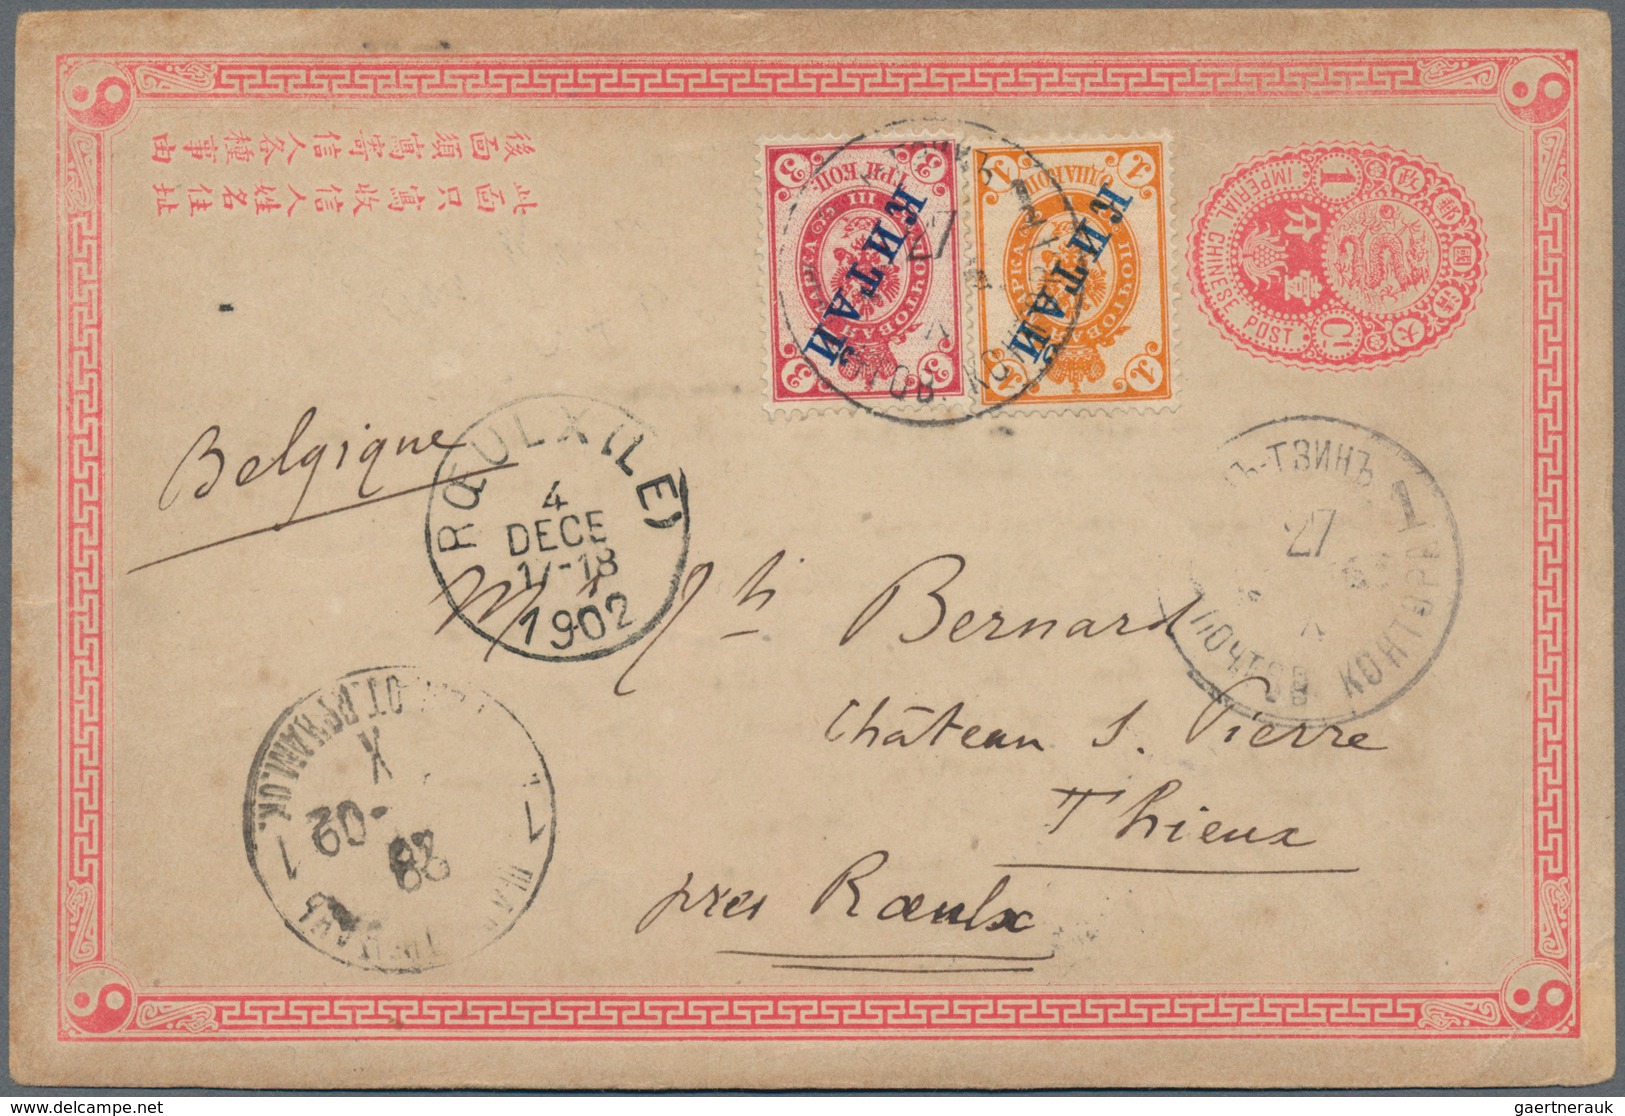 Russische Post In China: 1899, 1 K., 3 K. Tied "TIENTSIN 27 X 1903" To China Stationery Card 1897 IC - China